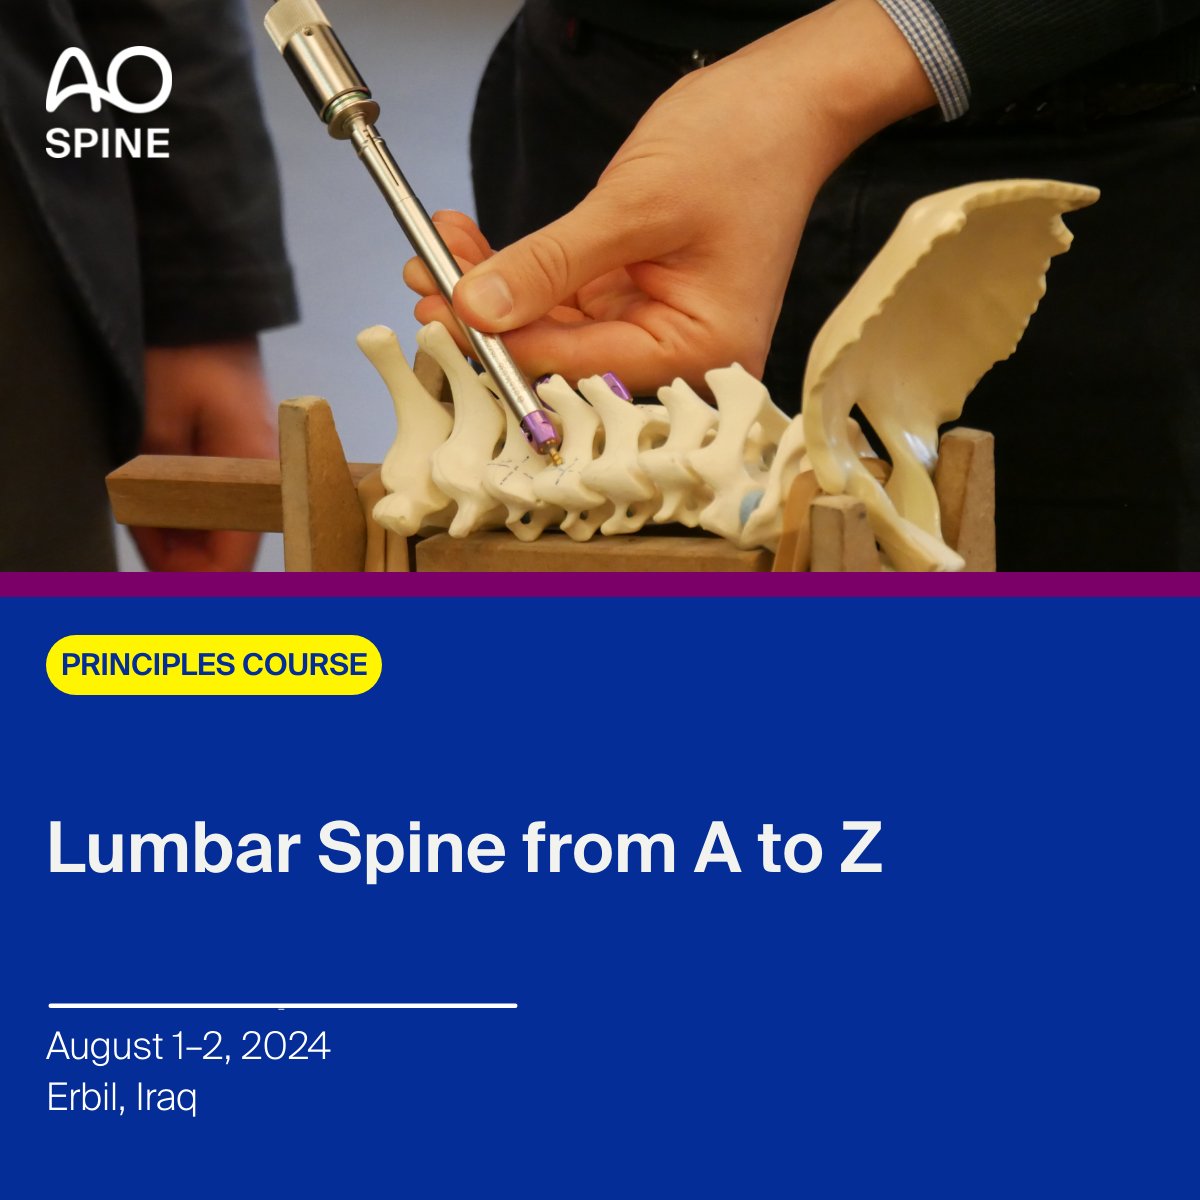 Join us and benefit from this 2-day principles-level course describing the common lumbar spine disorders! Topics will include basics, degenerative, trauma, deformity, infection and tumor. Chairperson: Ahmed Alqatub (Iraq) Save the date & learn more brnw.ch/21wIuJh